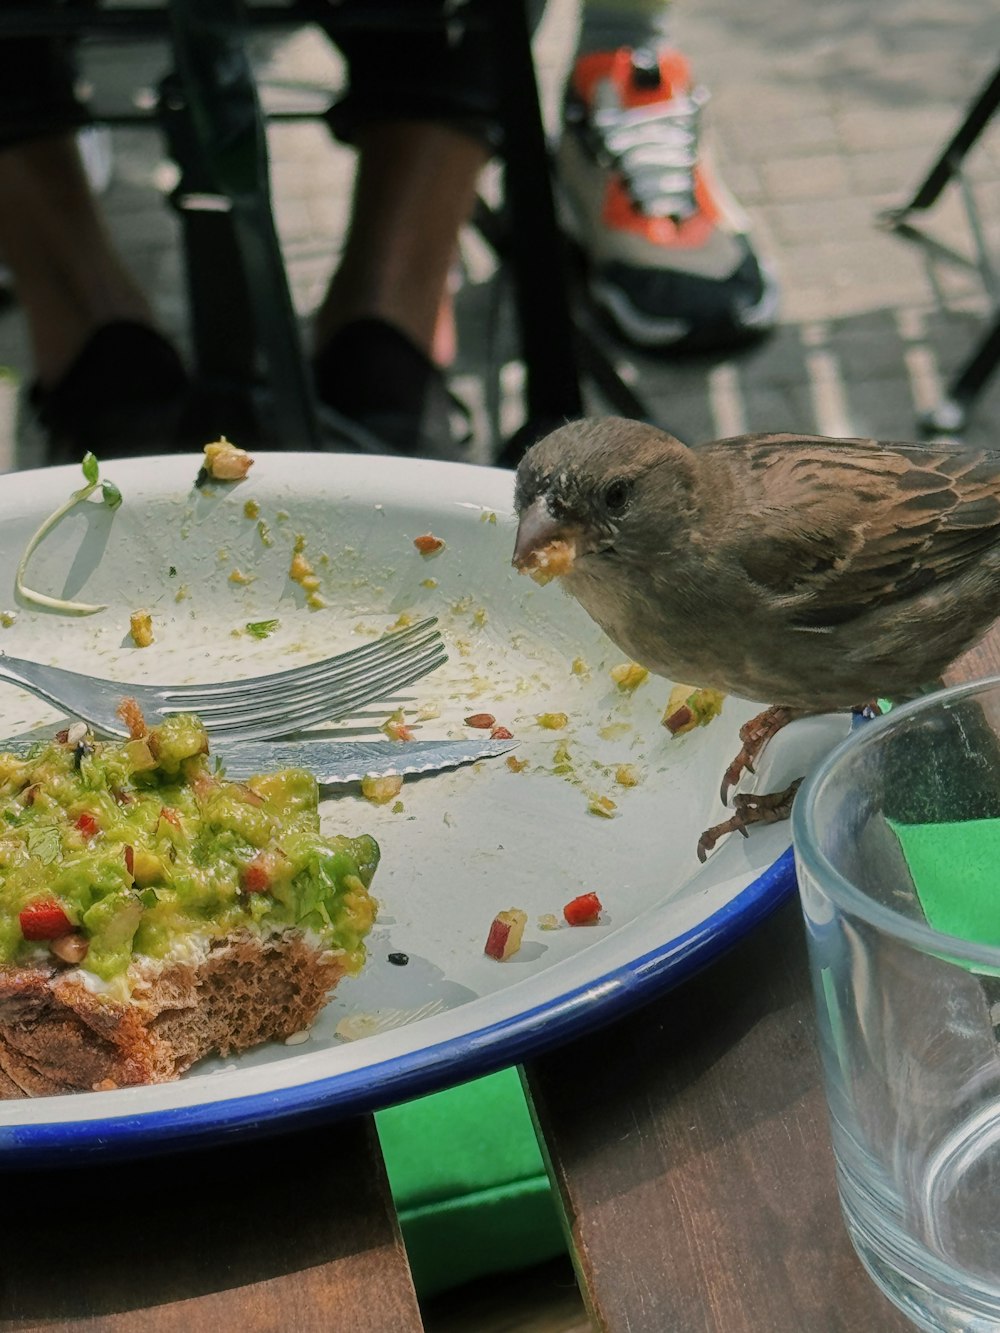 a bird eating food off of a plate on a table